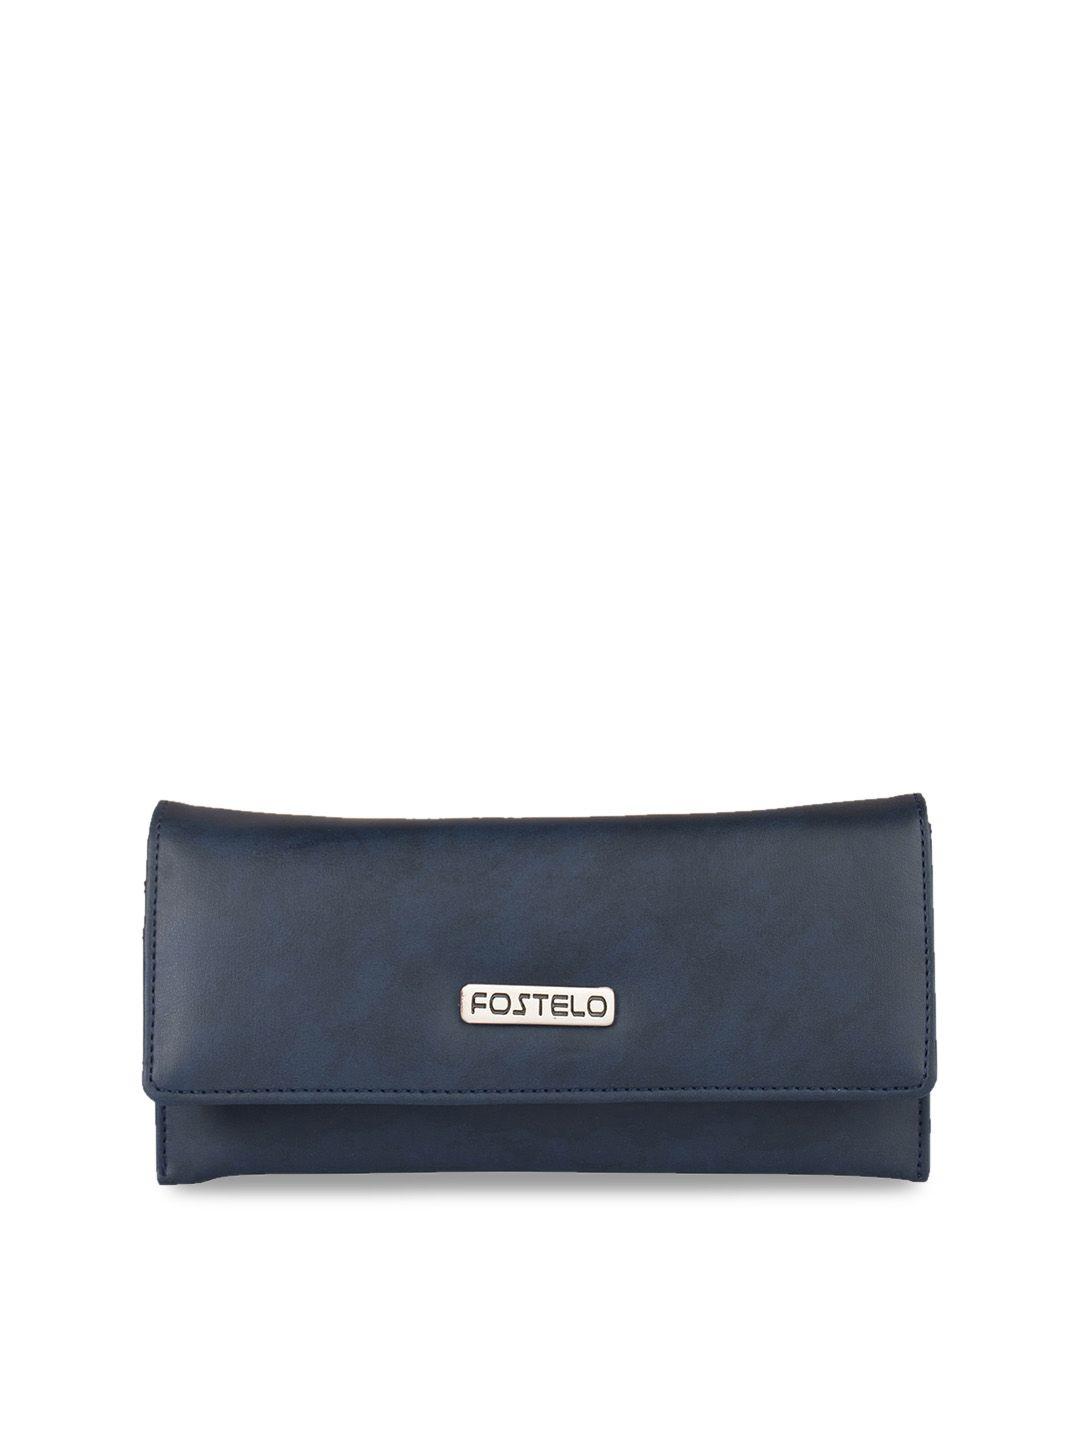 fostelo navy blue solid purse clutches